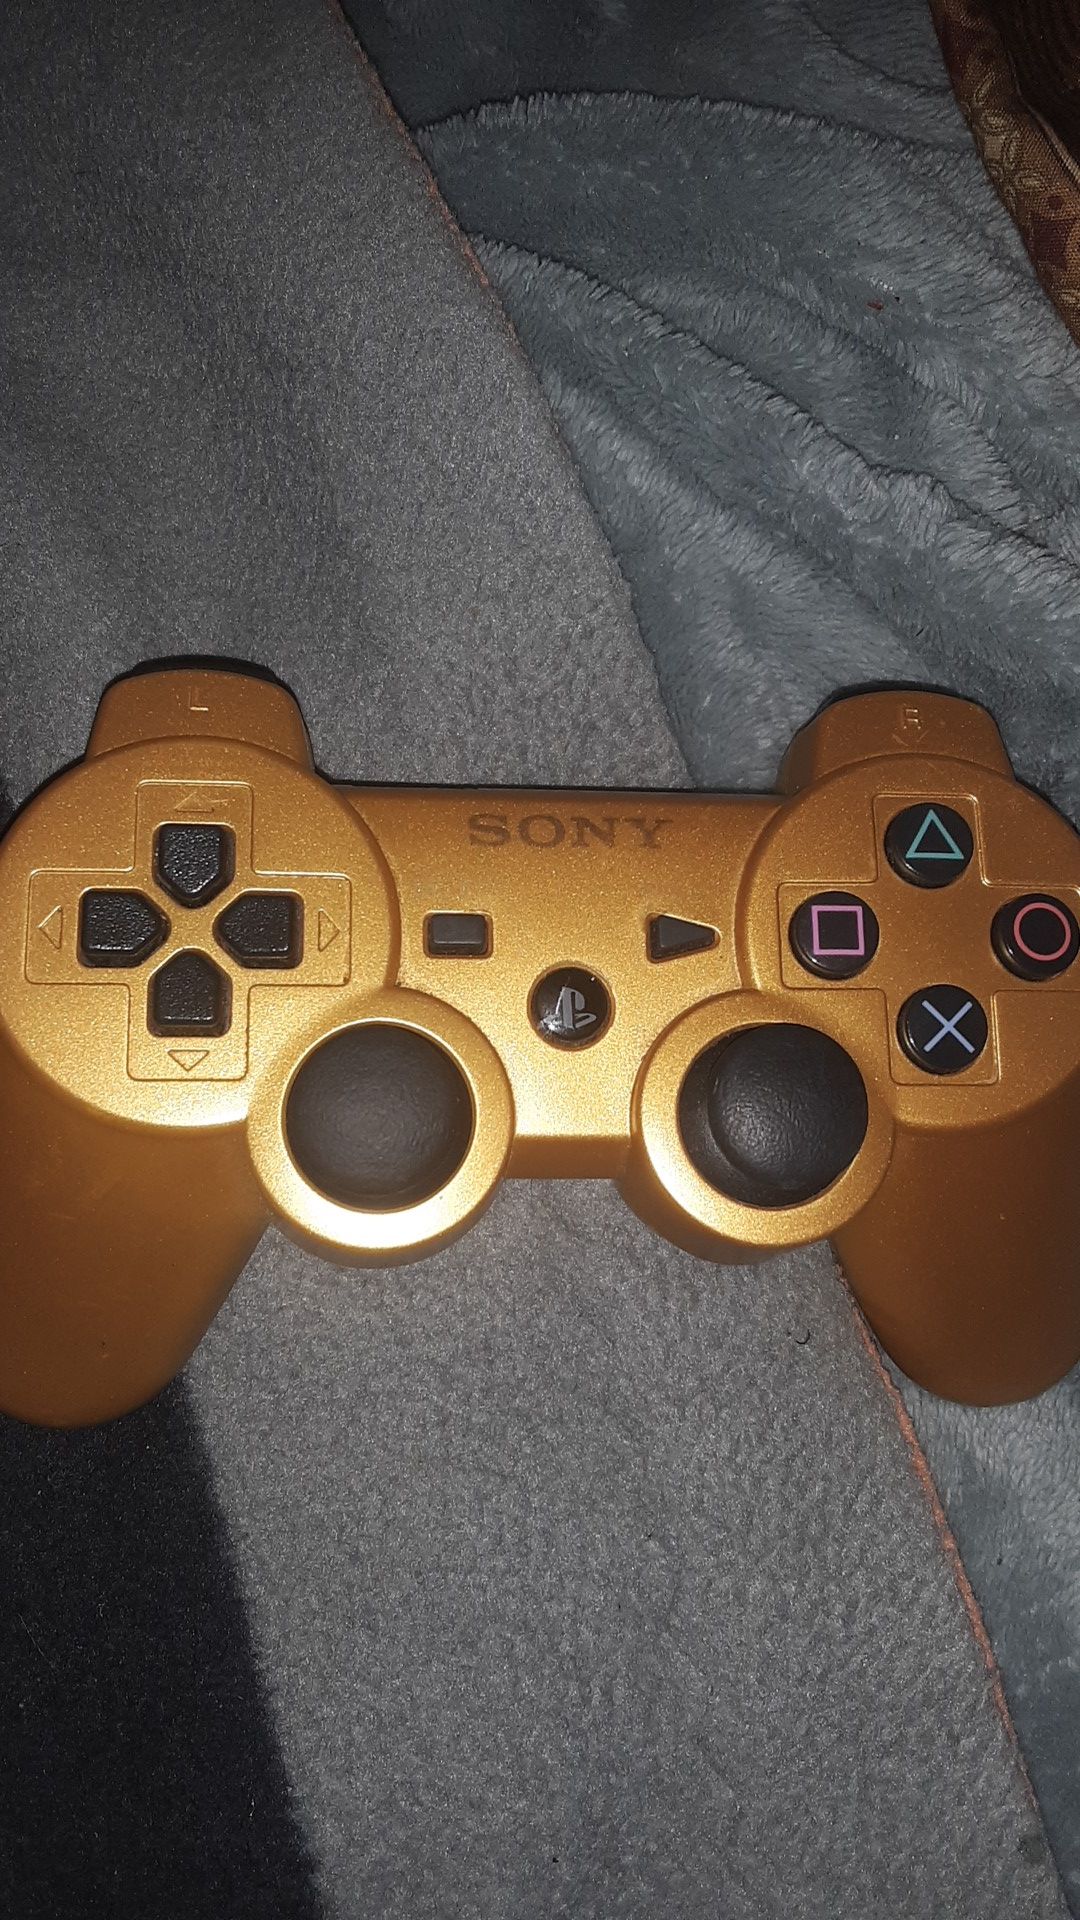 Ps3 controller, not wireless